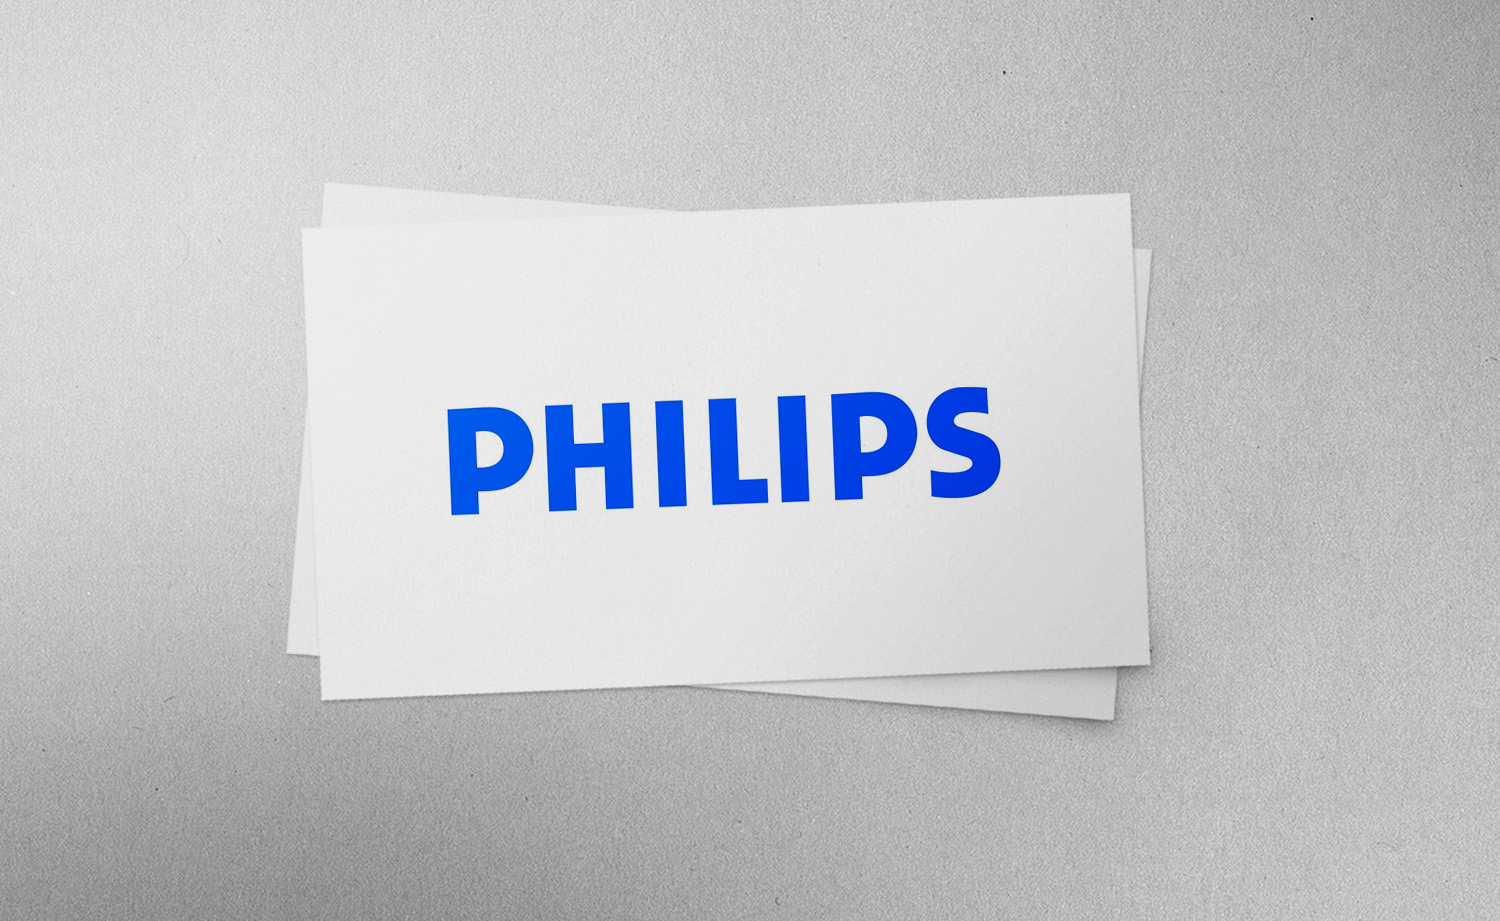 Image campaign for Philips